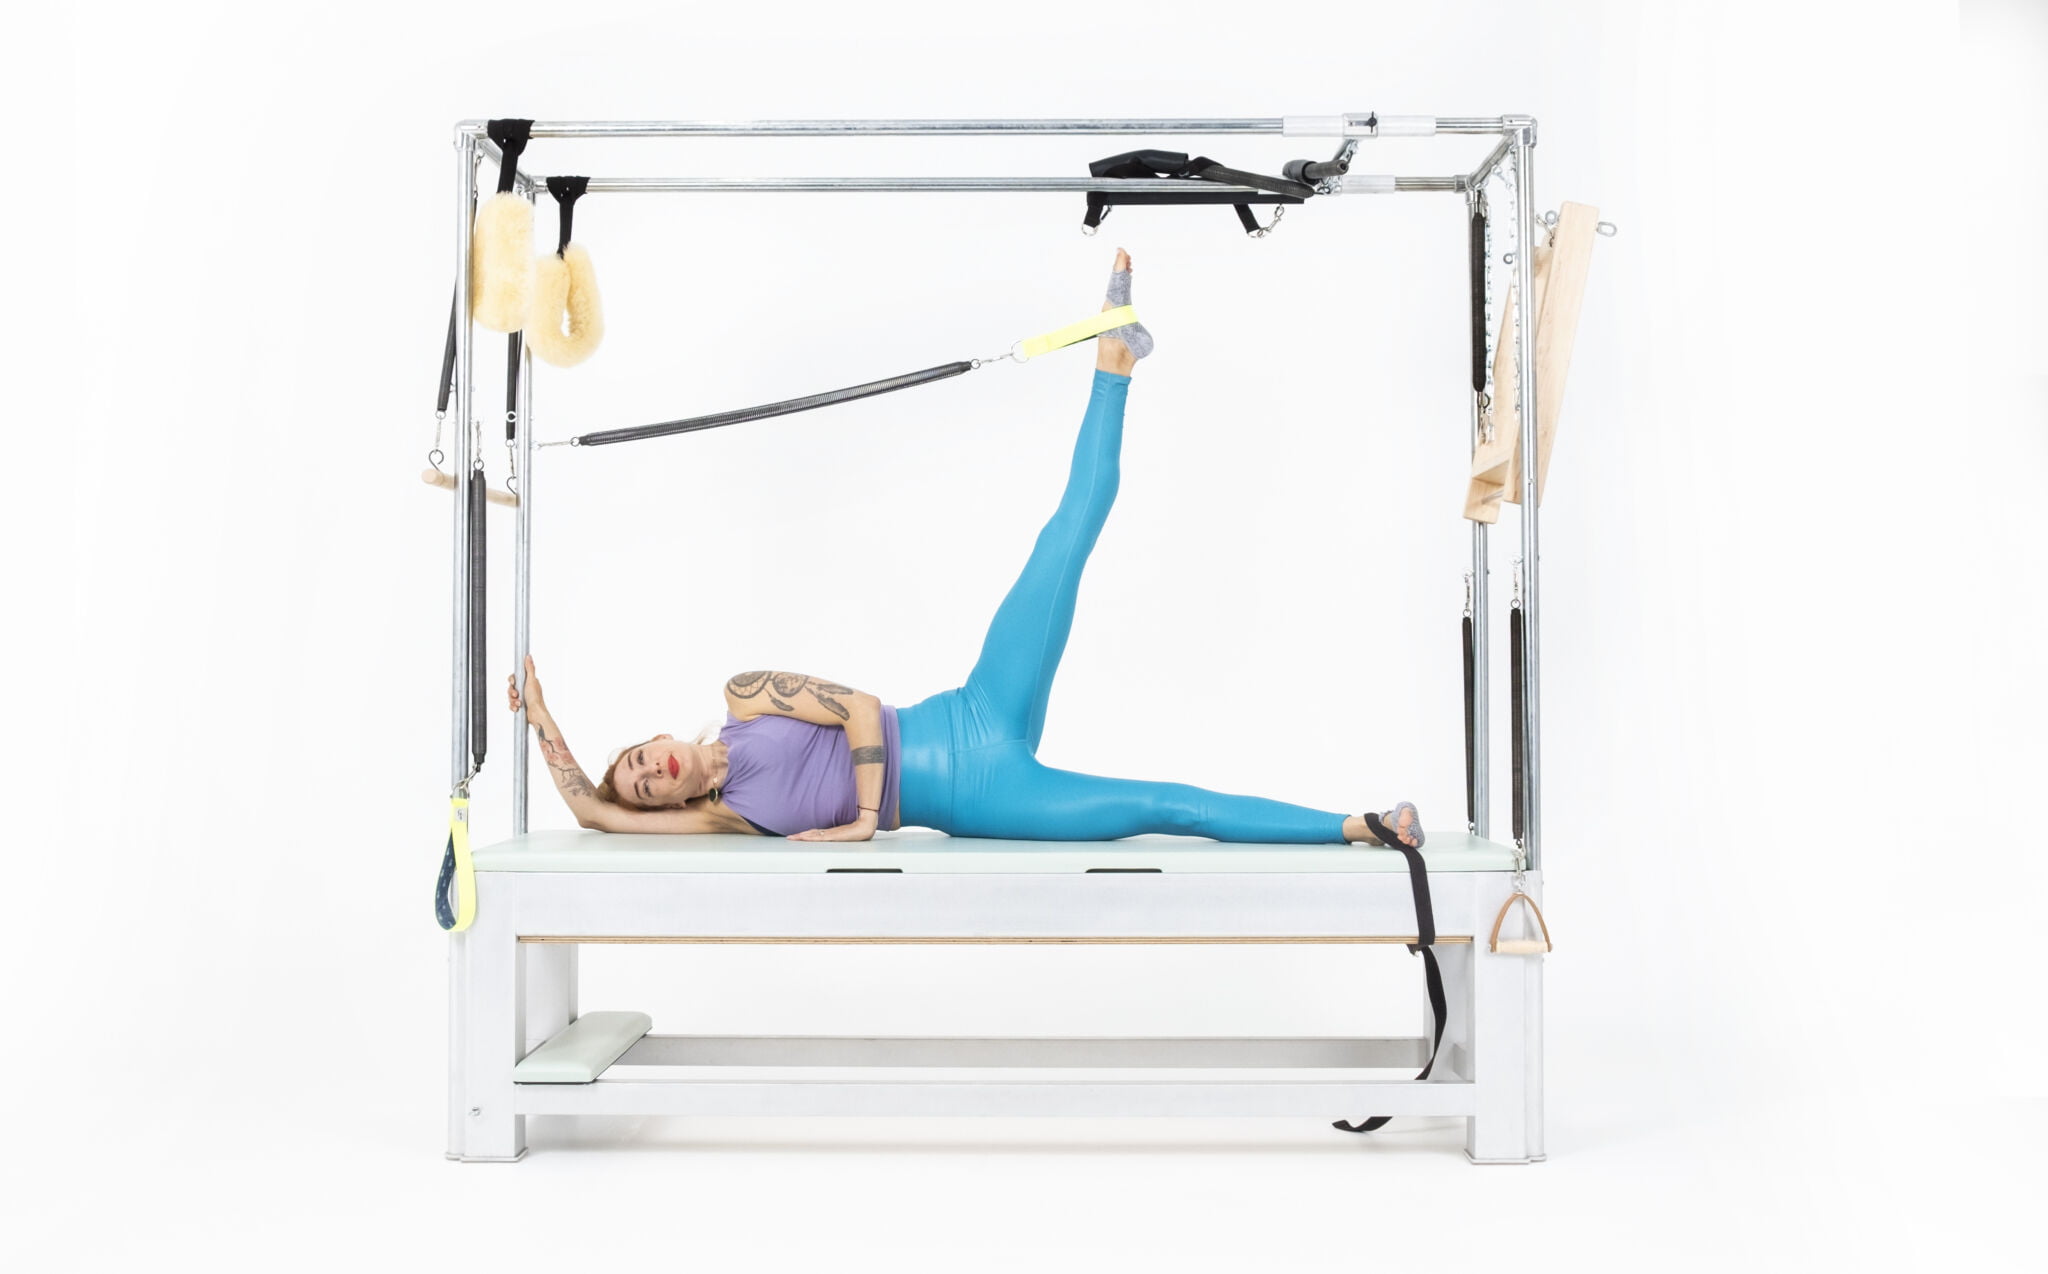 Side Leg Springs Up Down on the Cadillac or Tower Online Pilates Classes